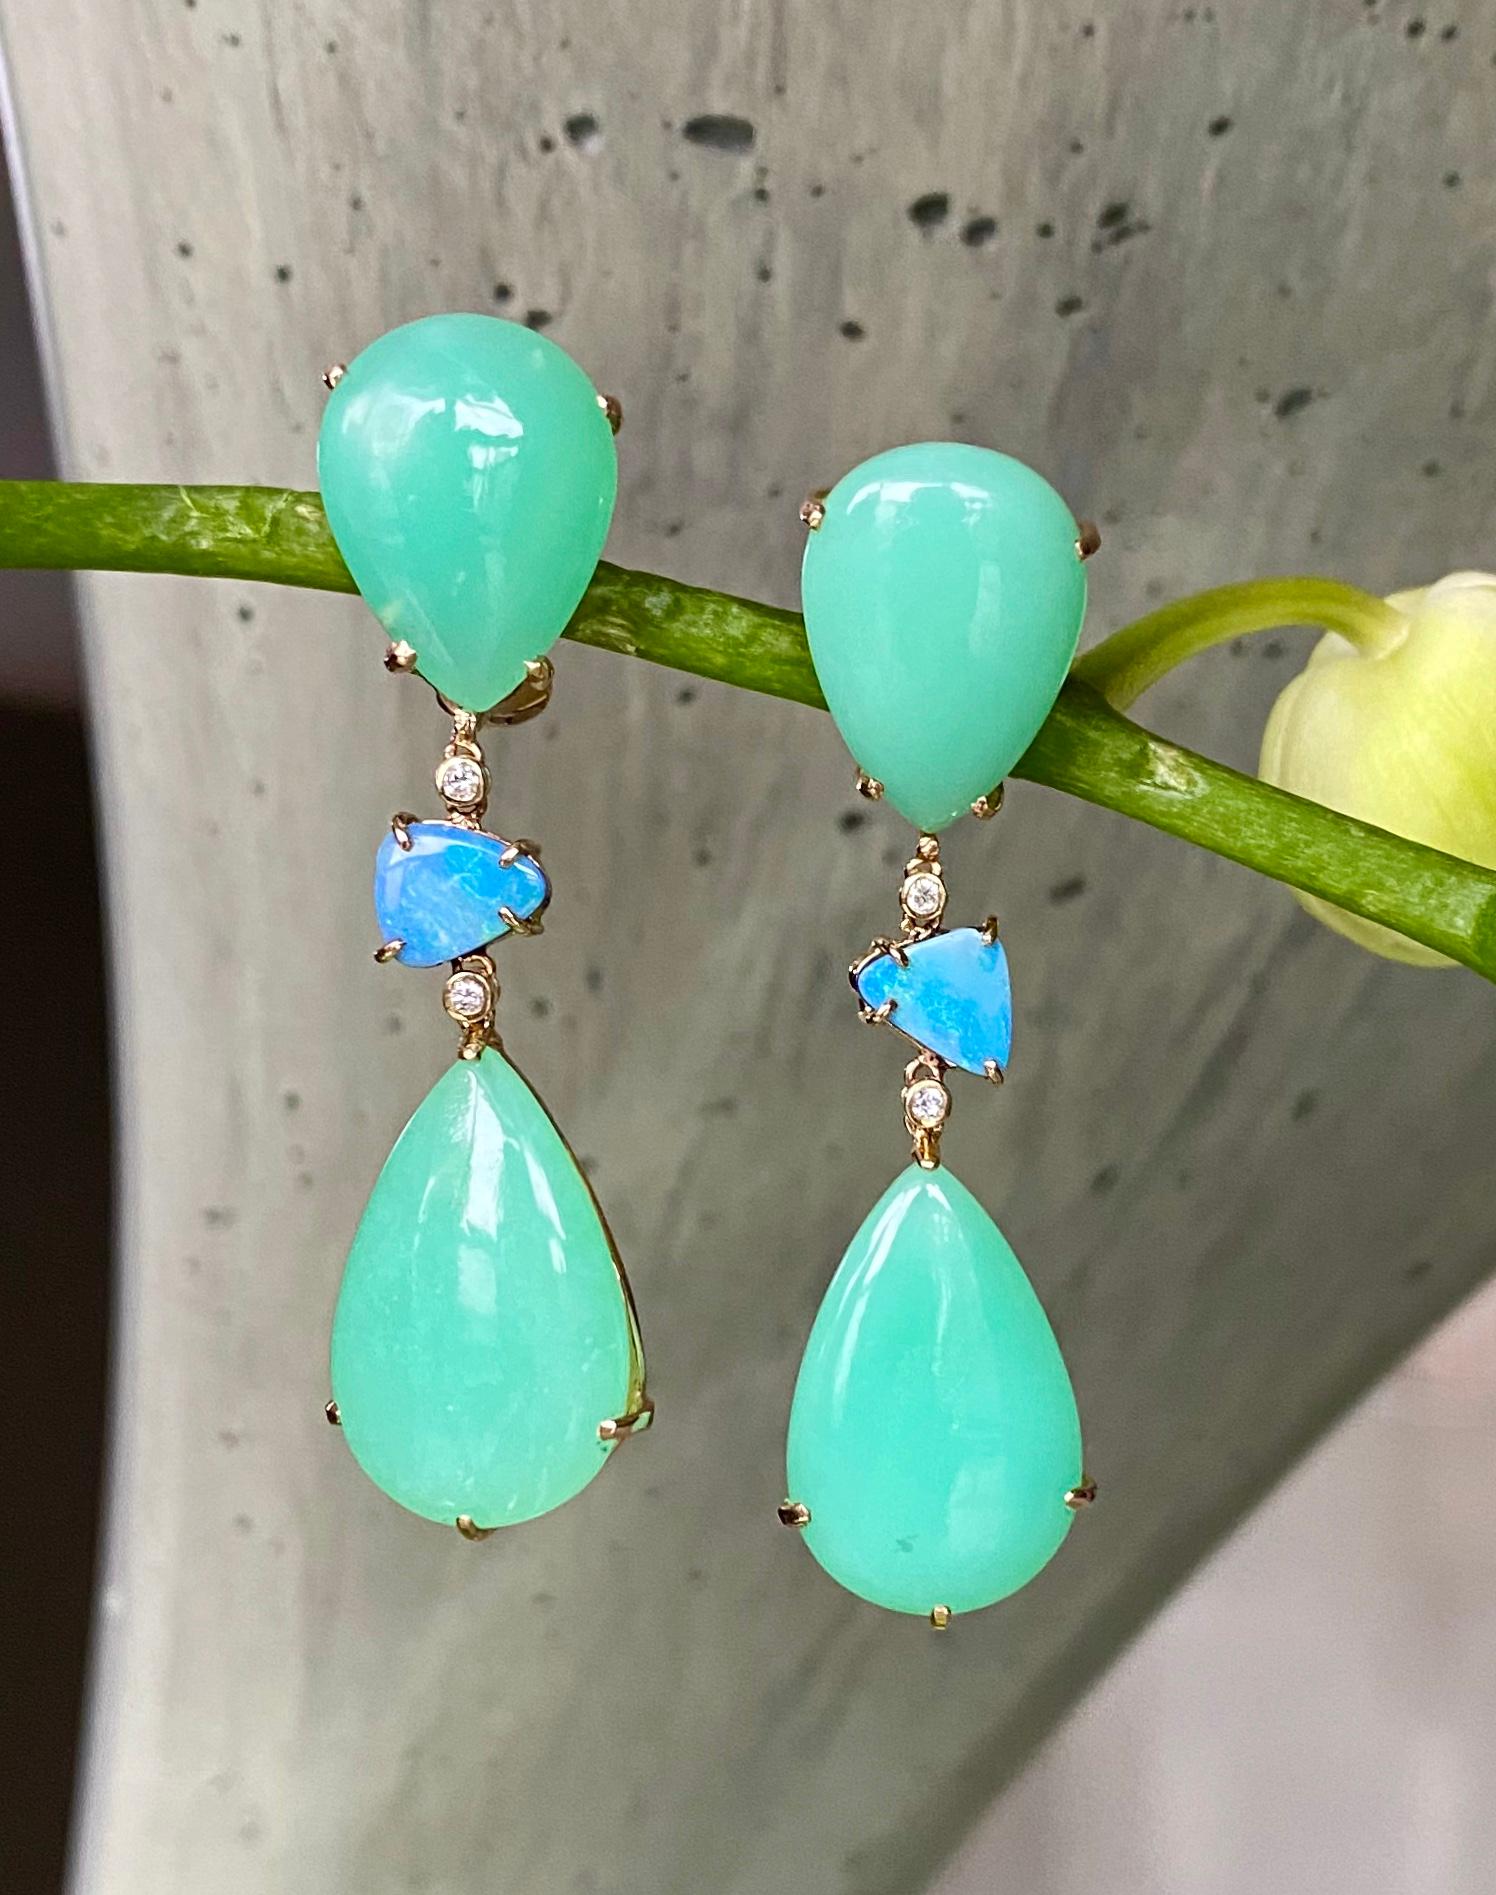 One-of-a-kind drop earrings of chrysoprase, boulder opals and diamonds, handcrafted in 18 karat yellow gold.

These vibrant apple green chrysoprase gemstones, designed with ocean hued boulder opals and diamonds, create a beautiful palette for